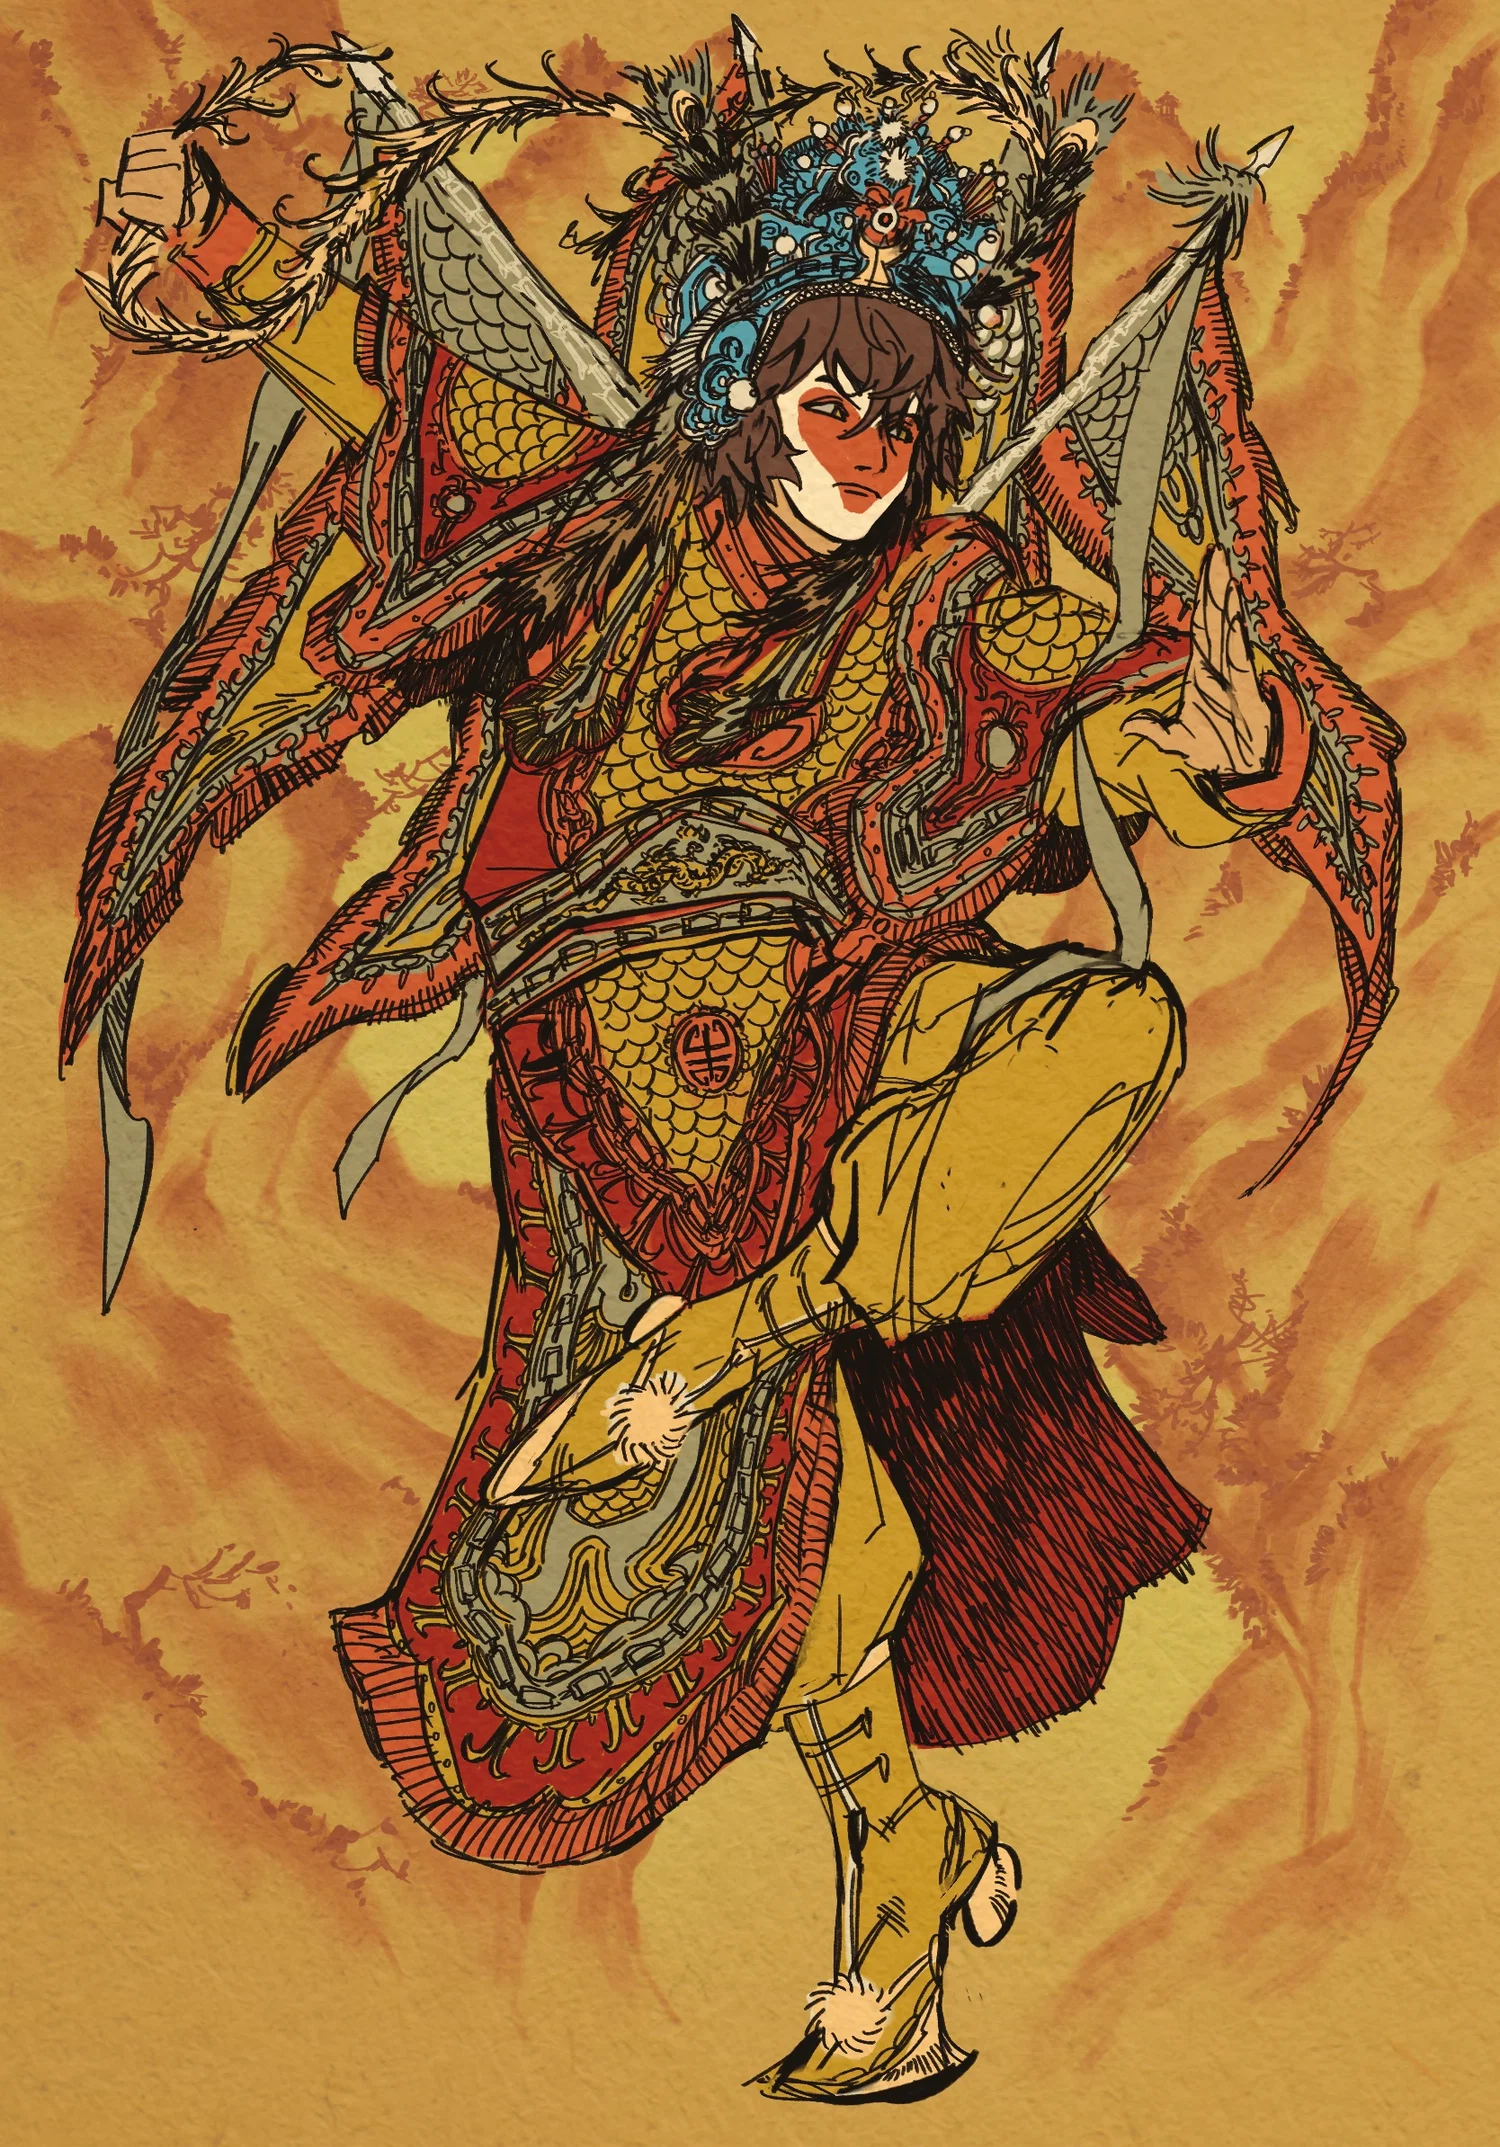 Sun Wukong from the classic Chinese novel, Journey to the West